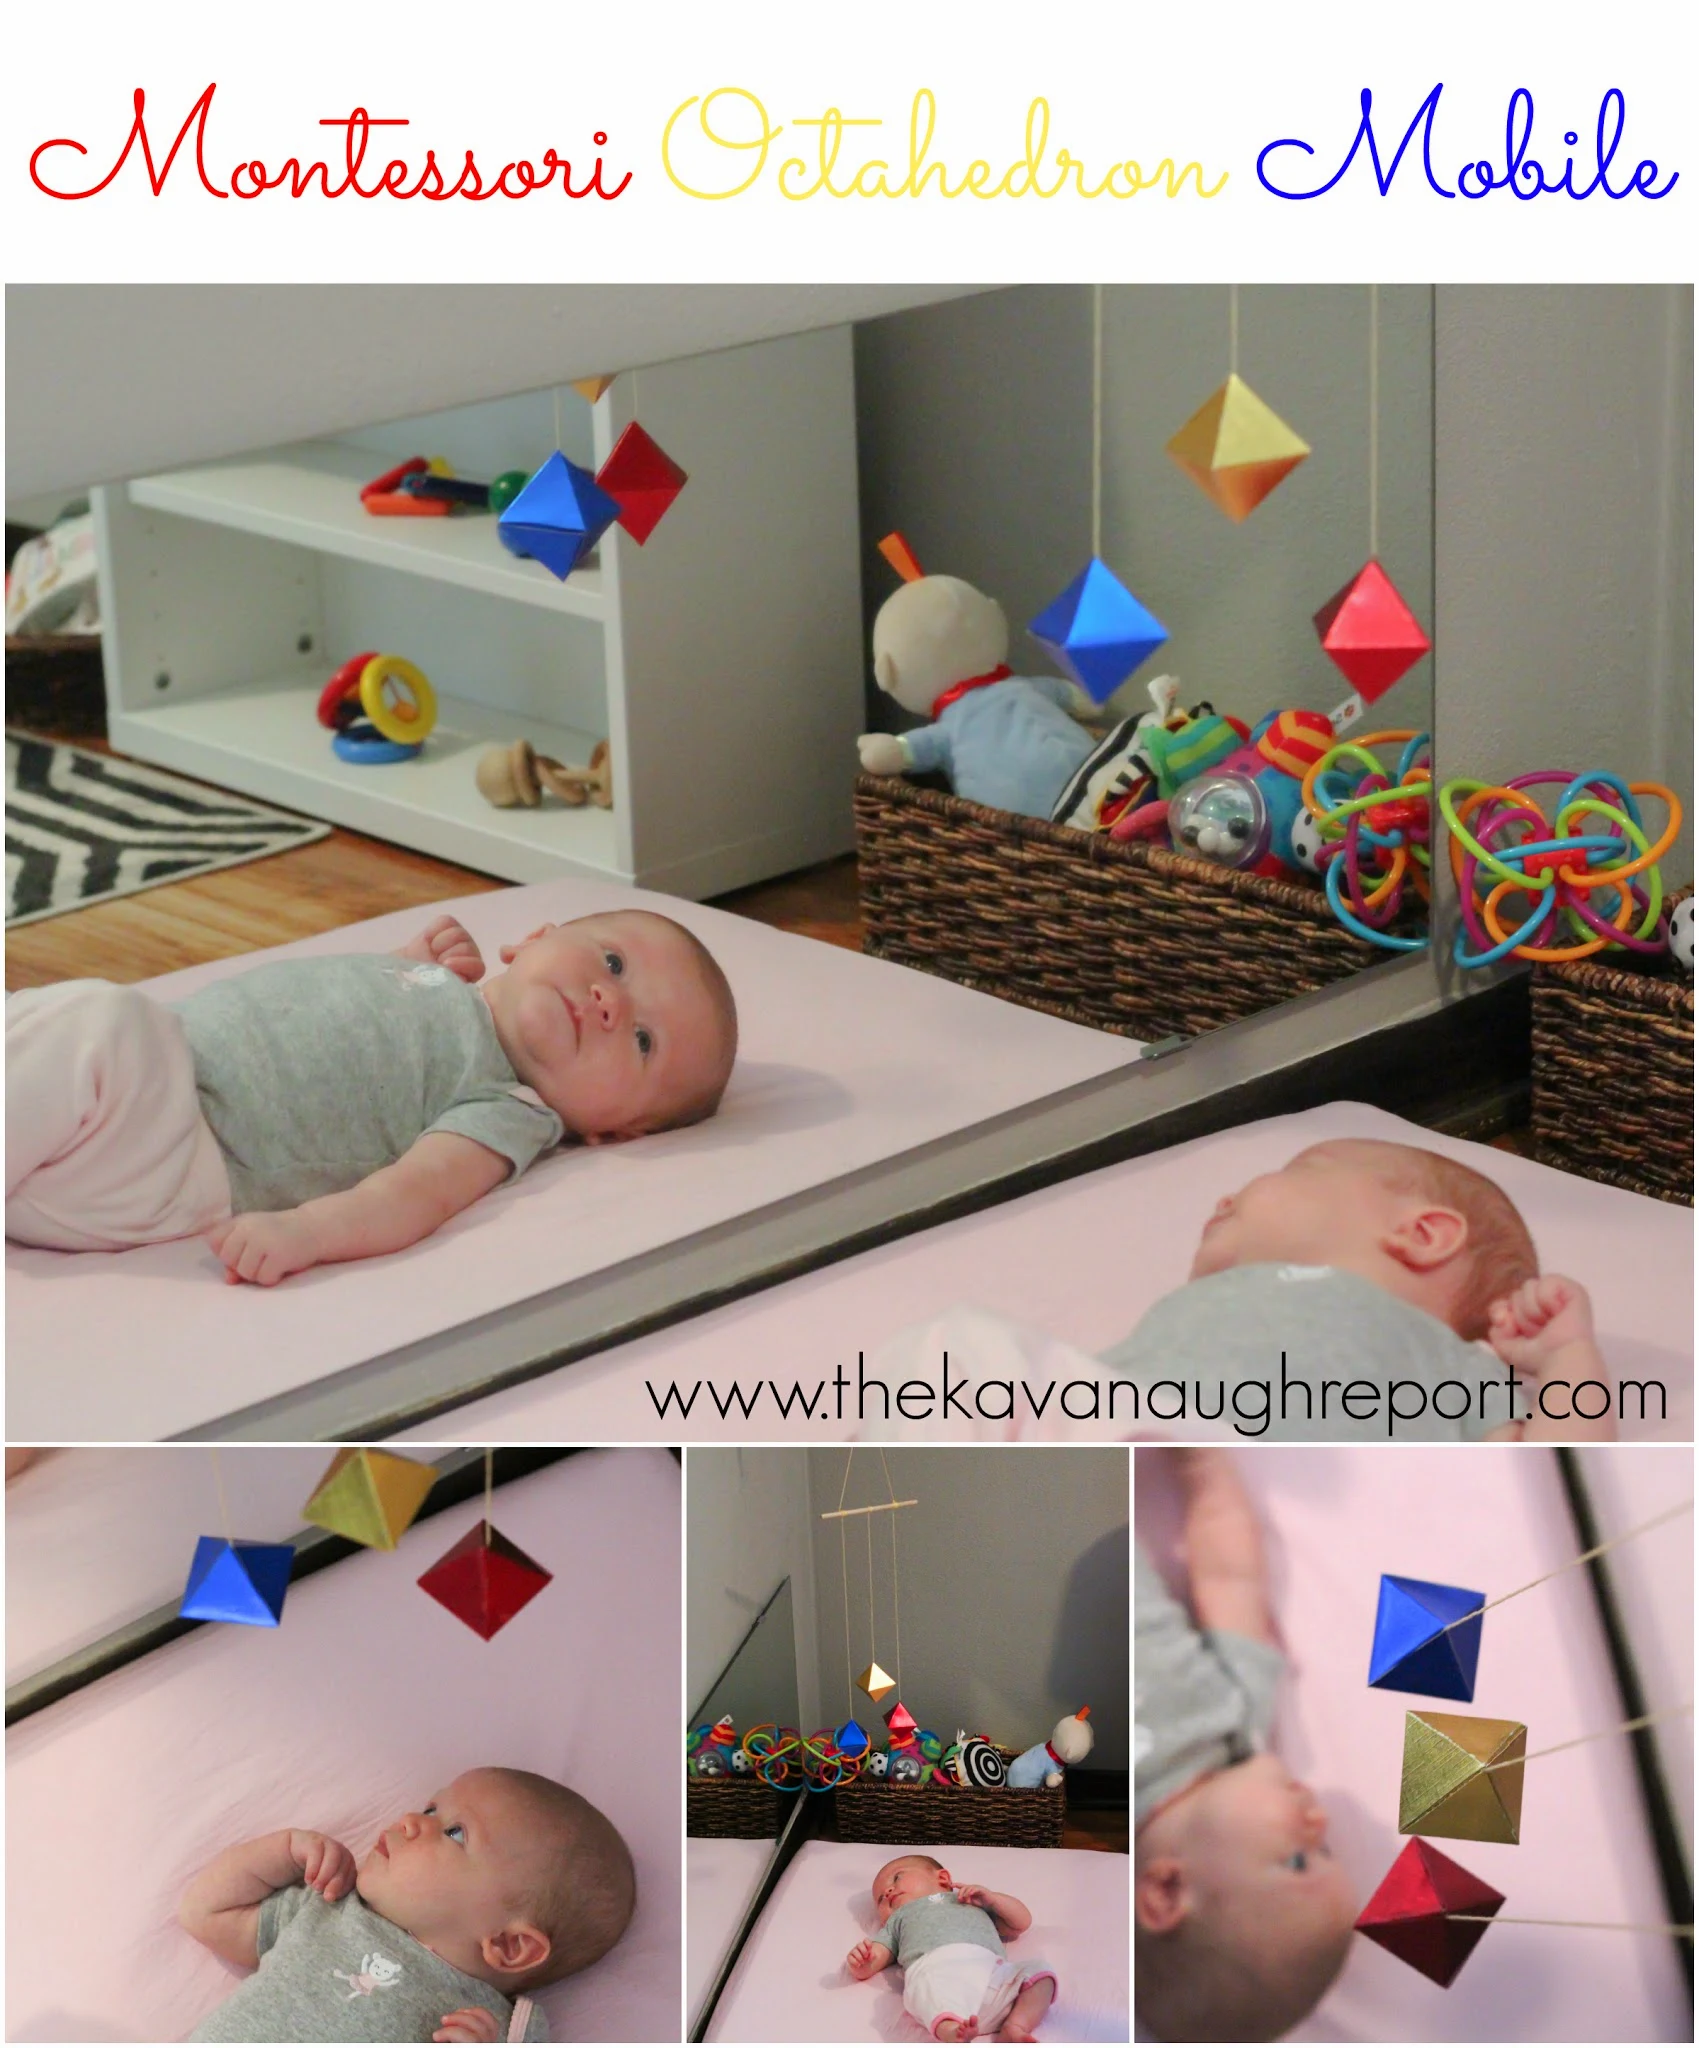 An overview of the Montessori baby visual mobile series. The visual series includes the Munari, Octahedron, Gobbi and Dancers mobiles and are the first work for infants from birth until they are several months old.